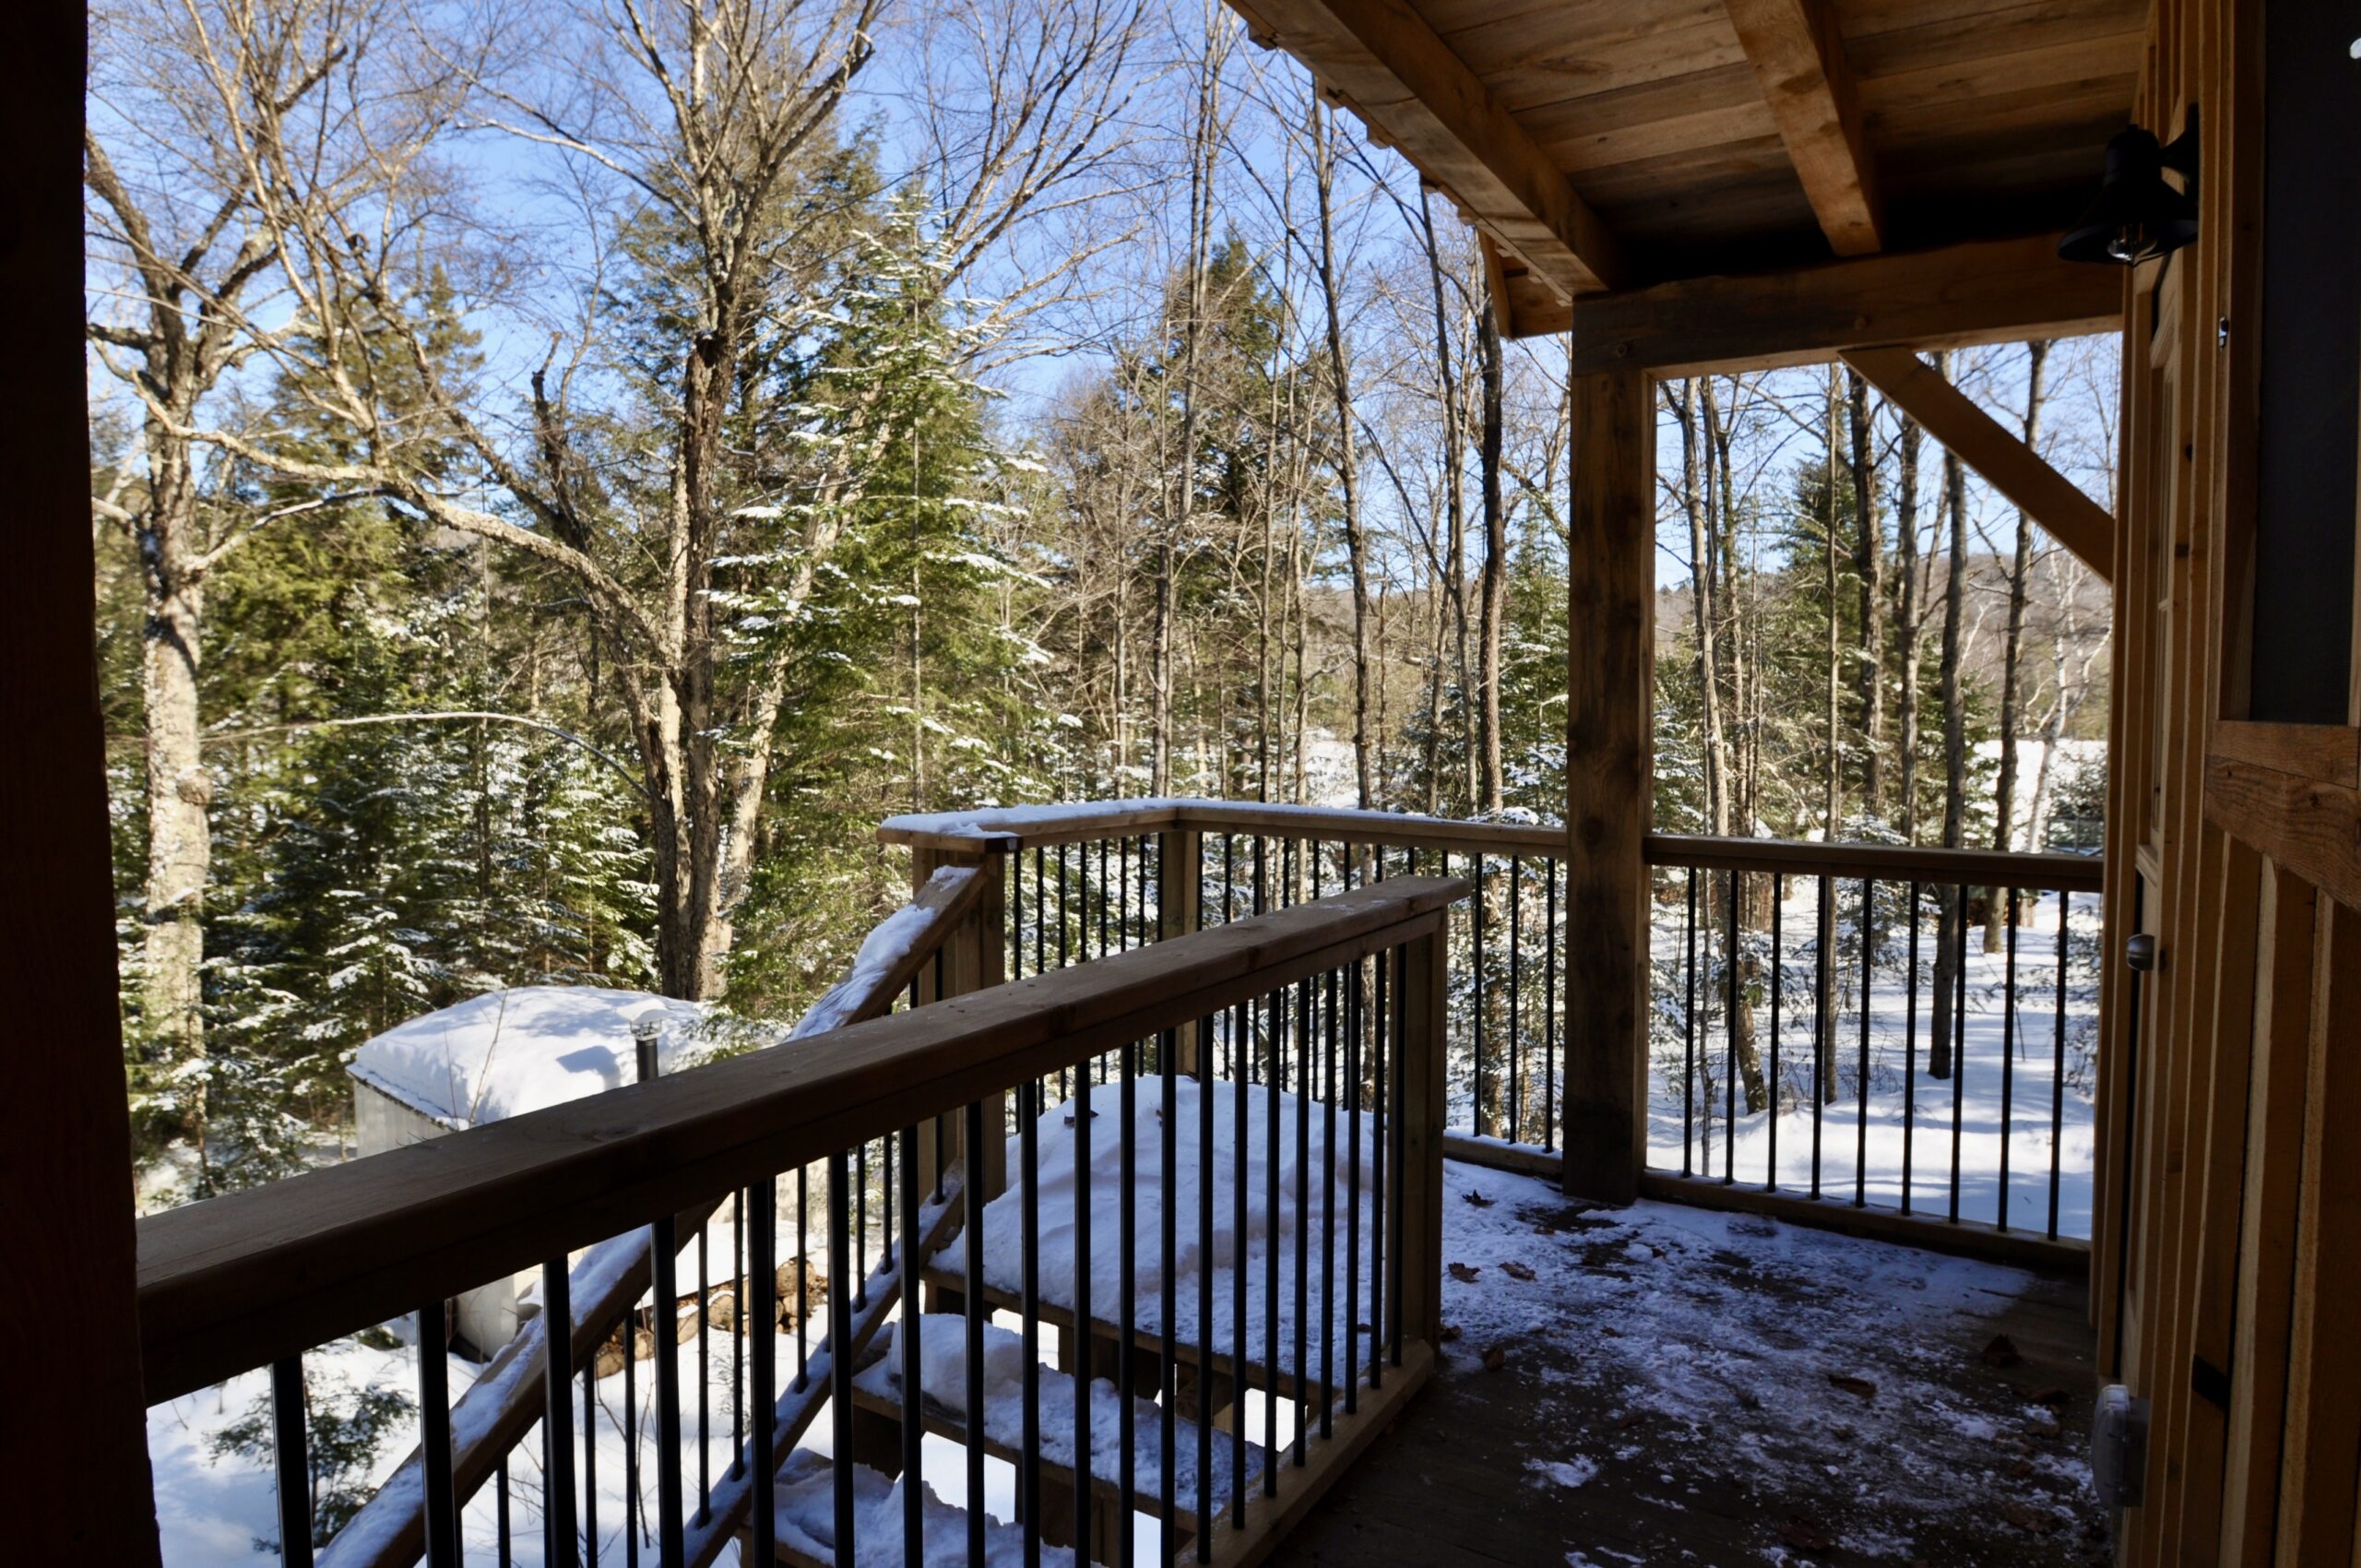 A big deck looks out over a snowy wooded area.